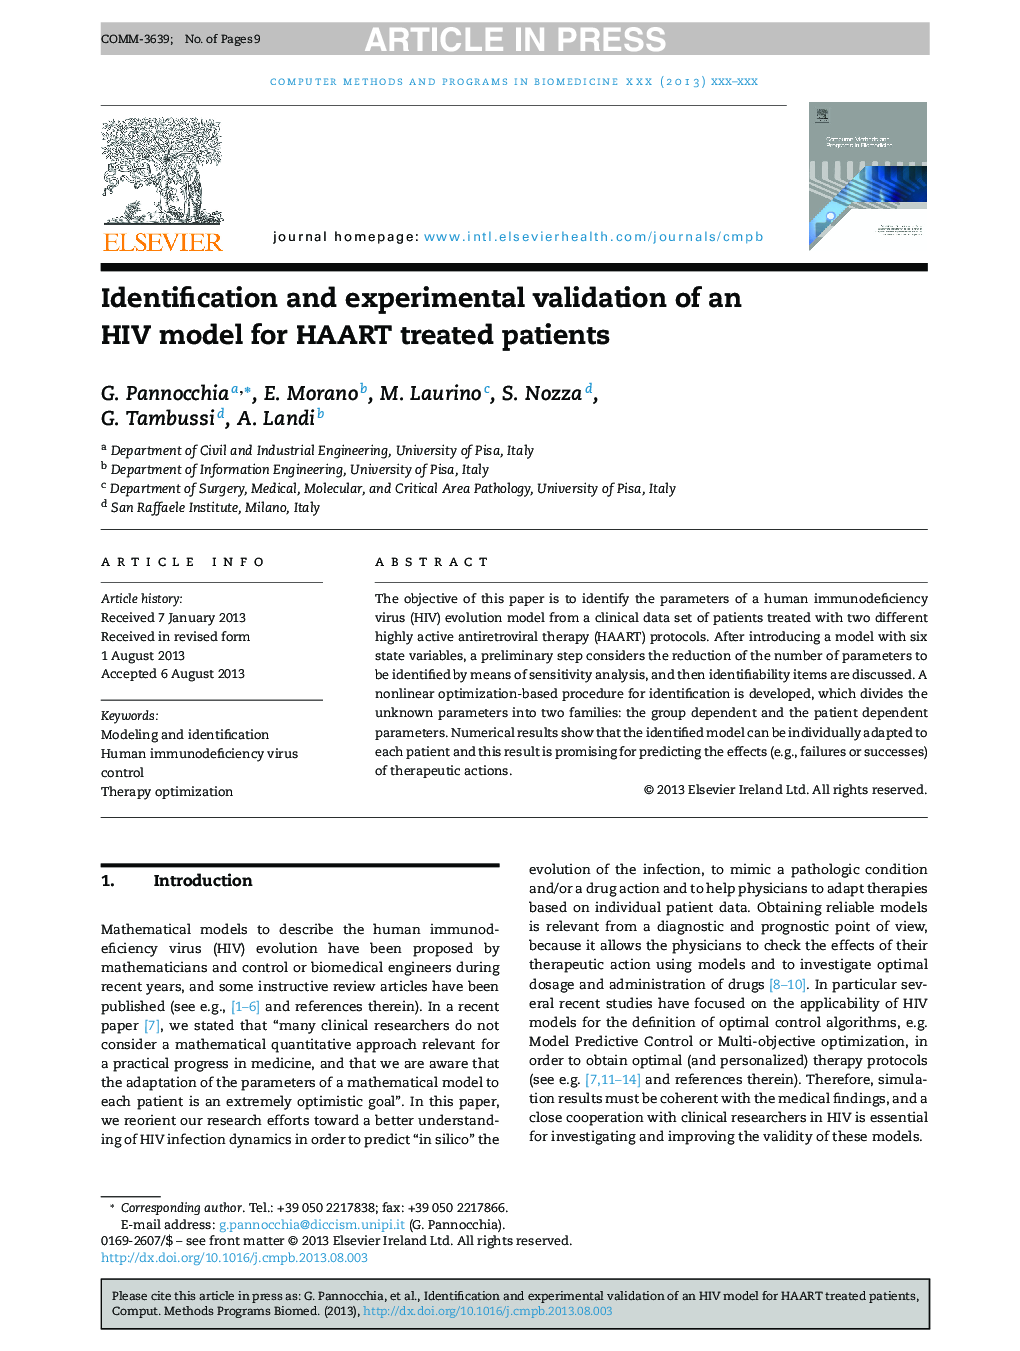 Identification and experimental validation of an HIV model for HAART treated patients